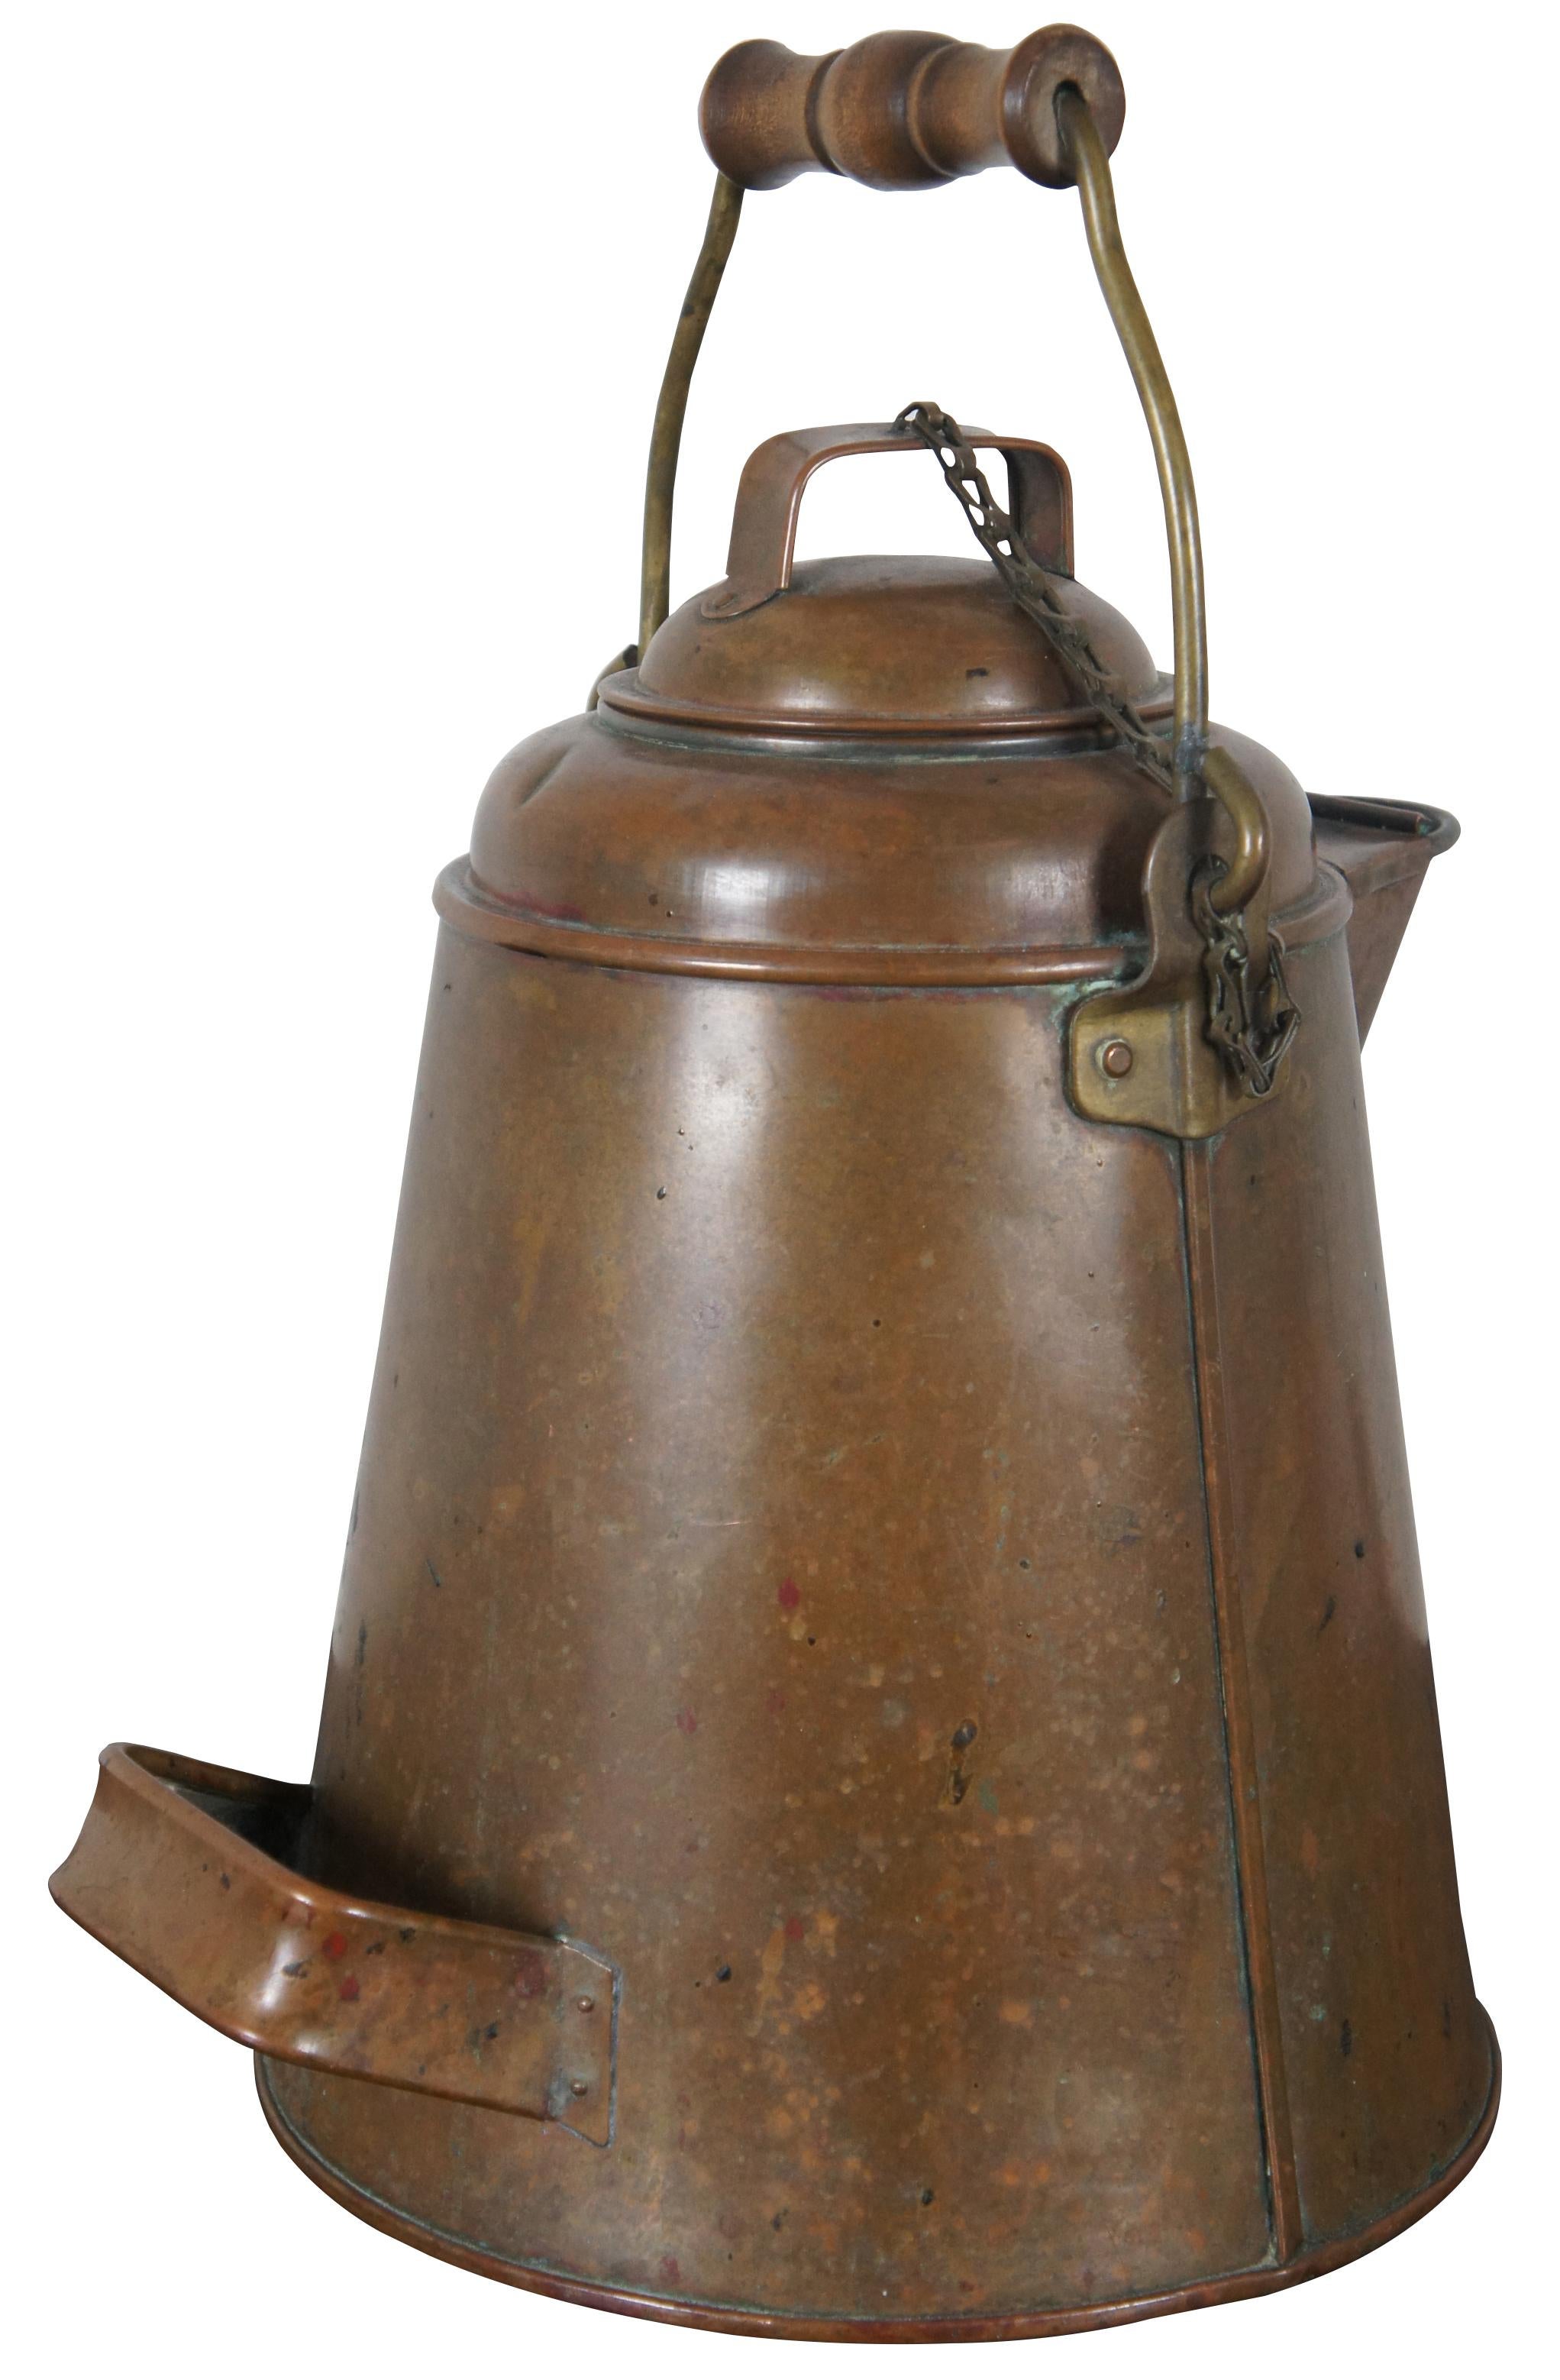 Large antique 19th century copper coffee pot or kettle. Made of copper over tin with wood handle and brass bale and attaching hardware. Used by cowboys and sailors in the late 19th century.

Measures: 12” x 10” x 13.5” / Height of handle – 6”